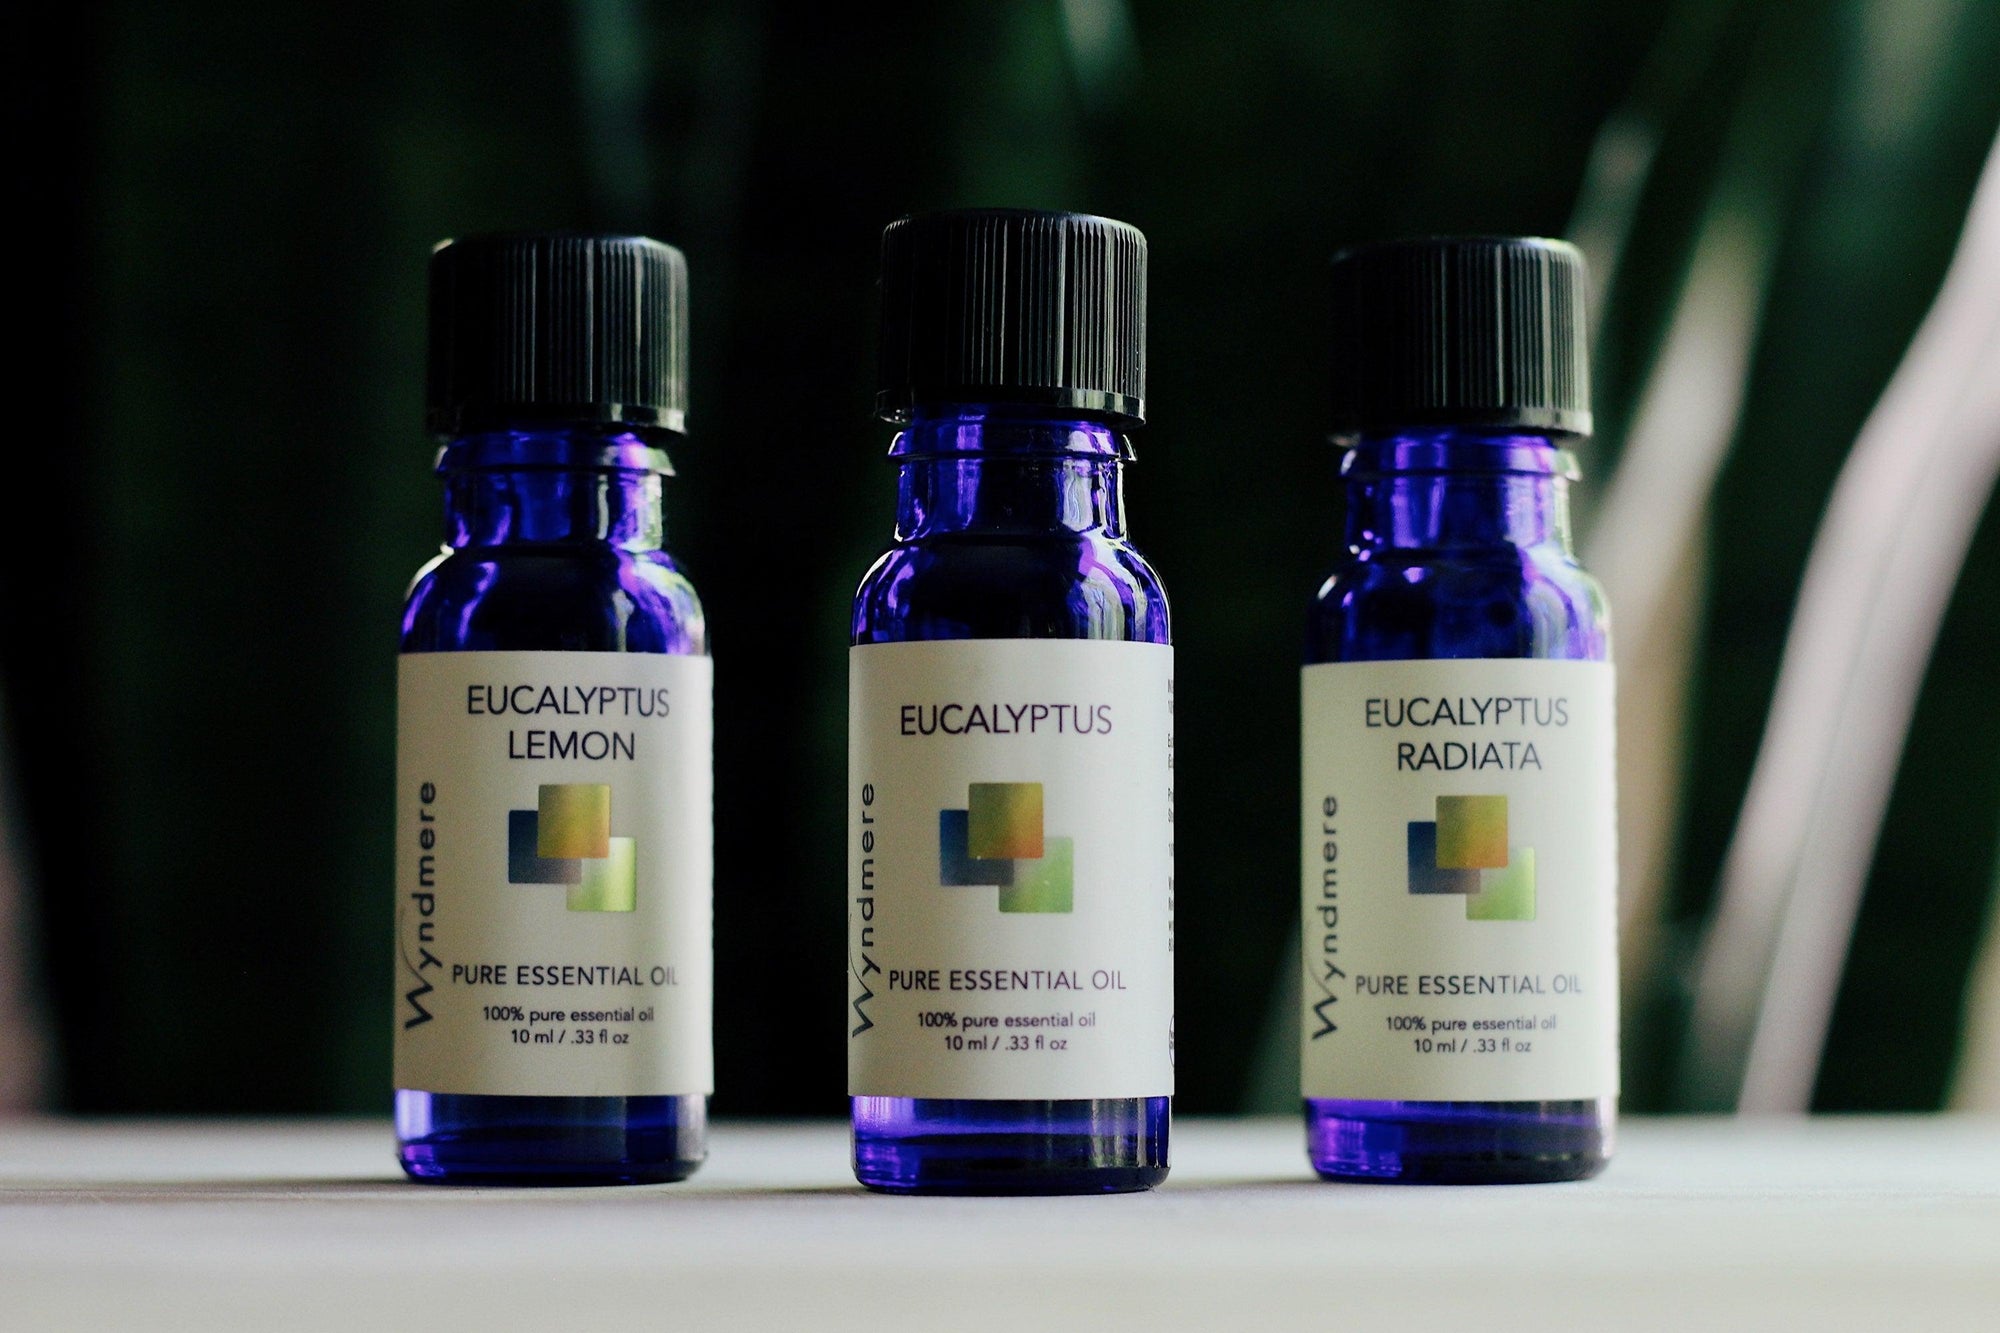 Wyndmere pure ingredients with the best pure essential oils. Eucalyptus, Eucalyptus, Eucalyptus lemon, Eucalyptus radiata, certified organic Eucalyptus